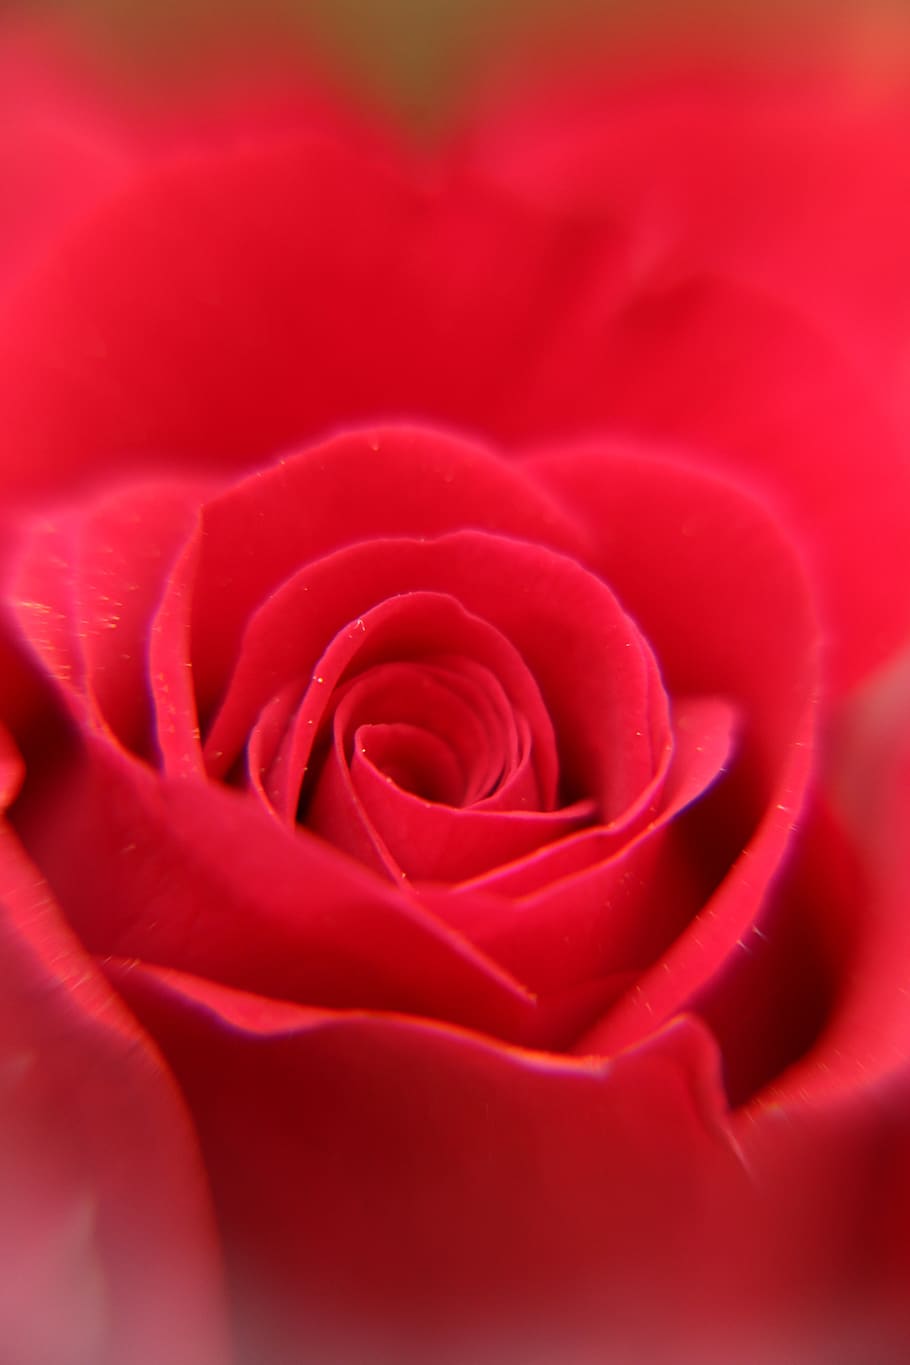 red, rose, flower, petals, close up, centre, bloom, phone wallpaper, flowering plant, beauty in nature